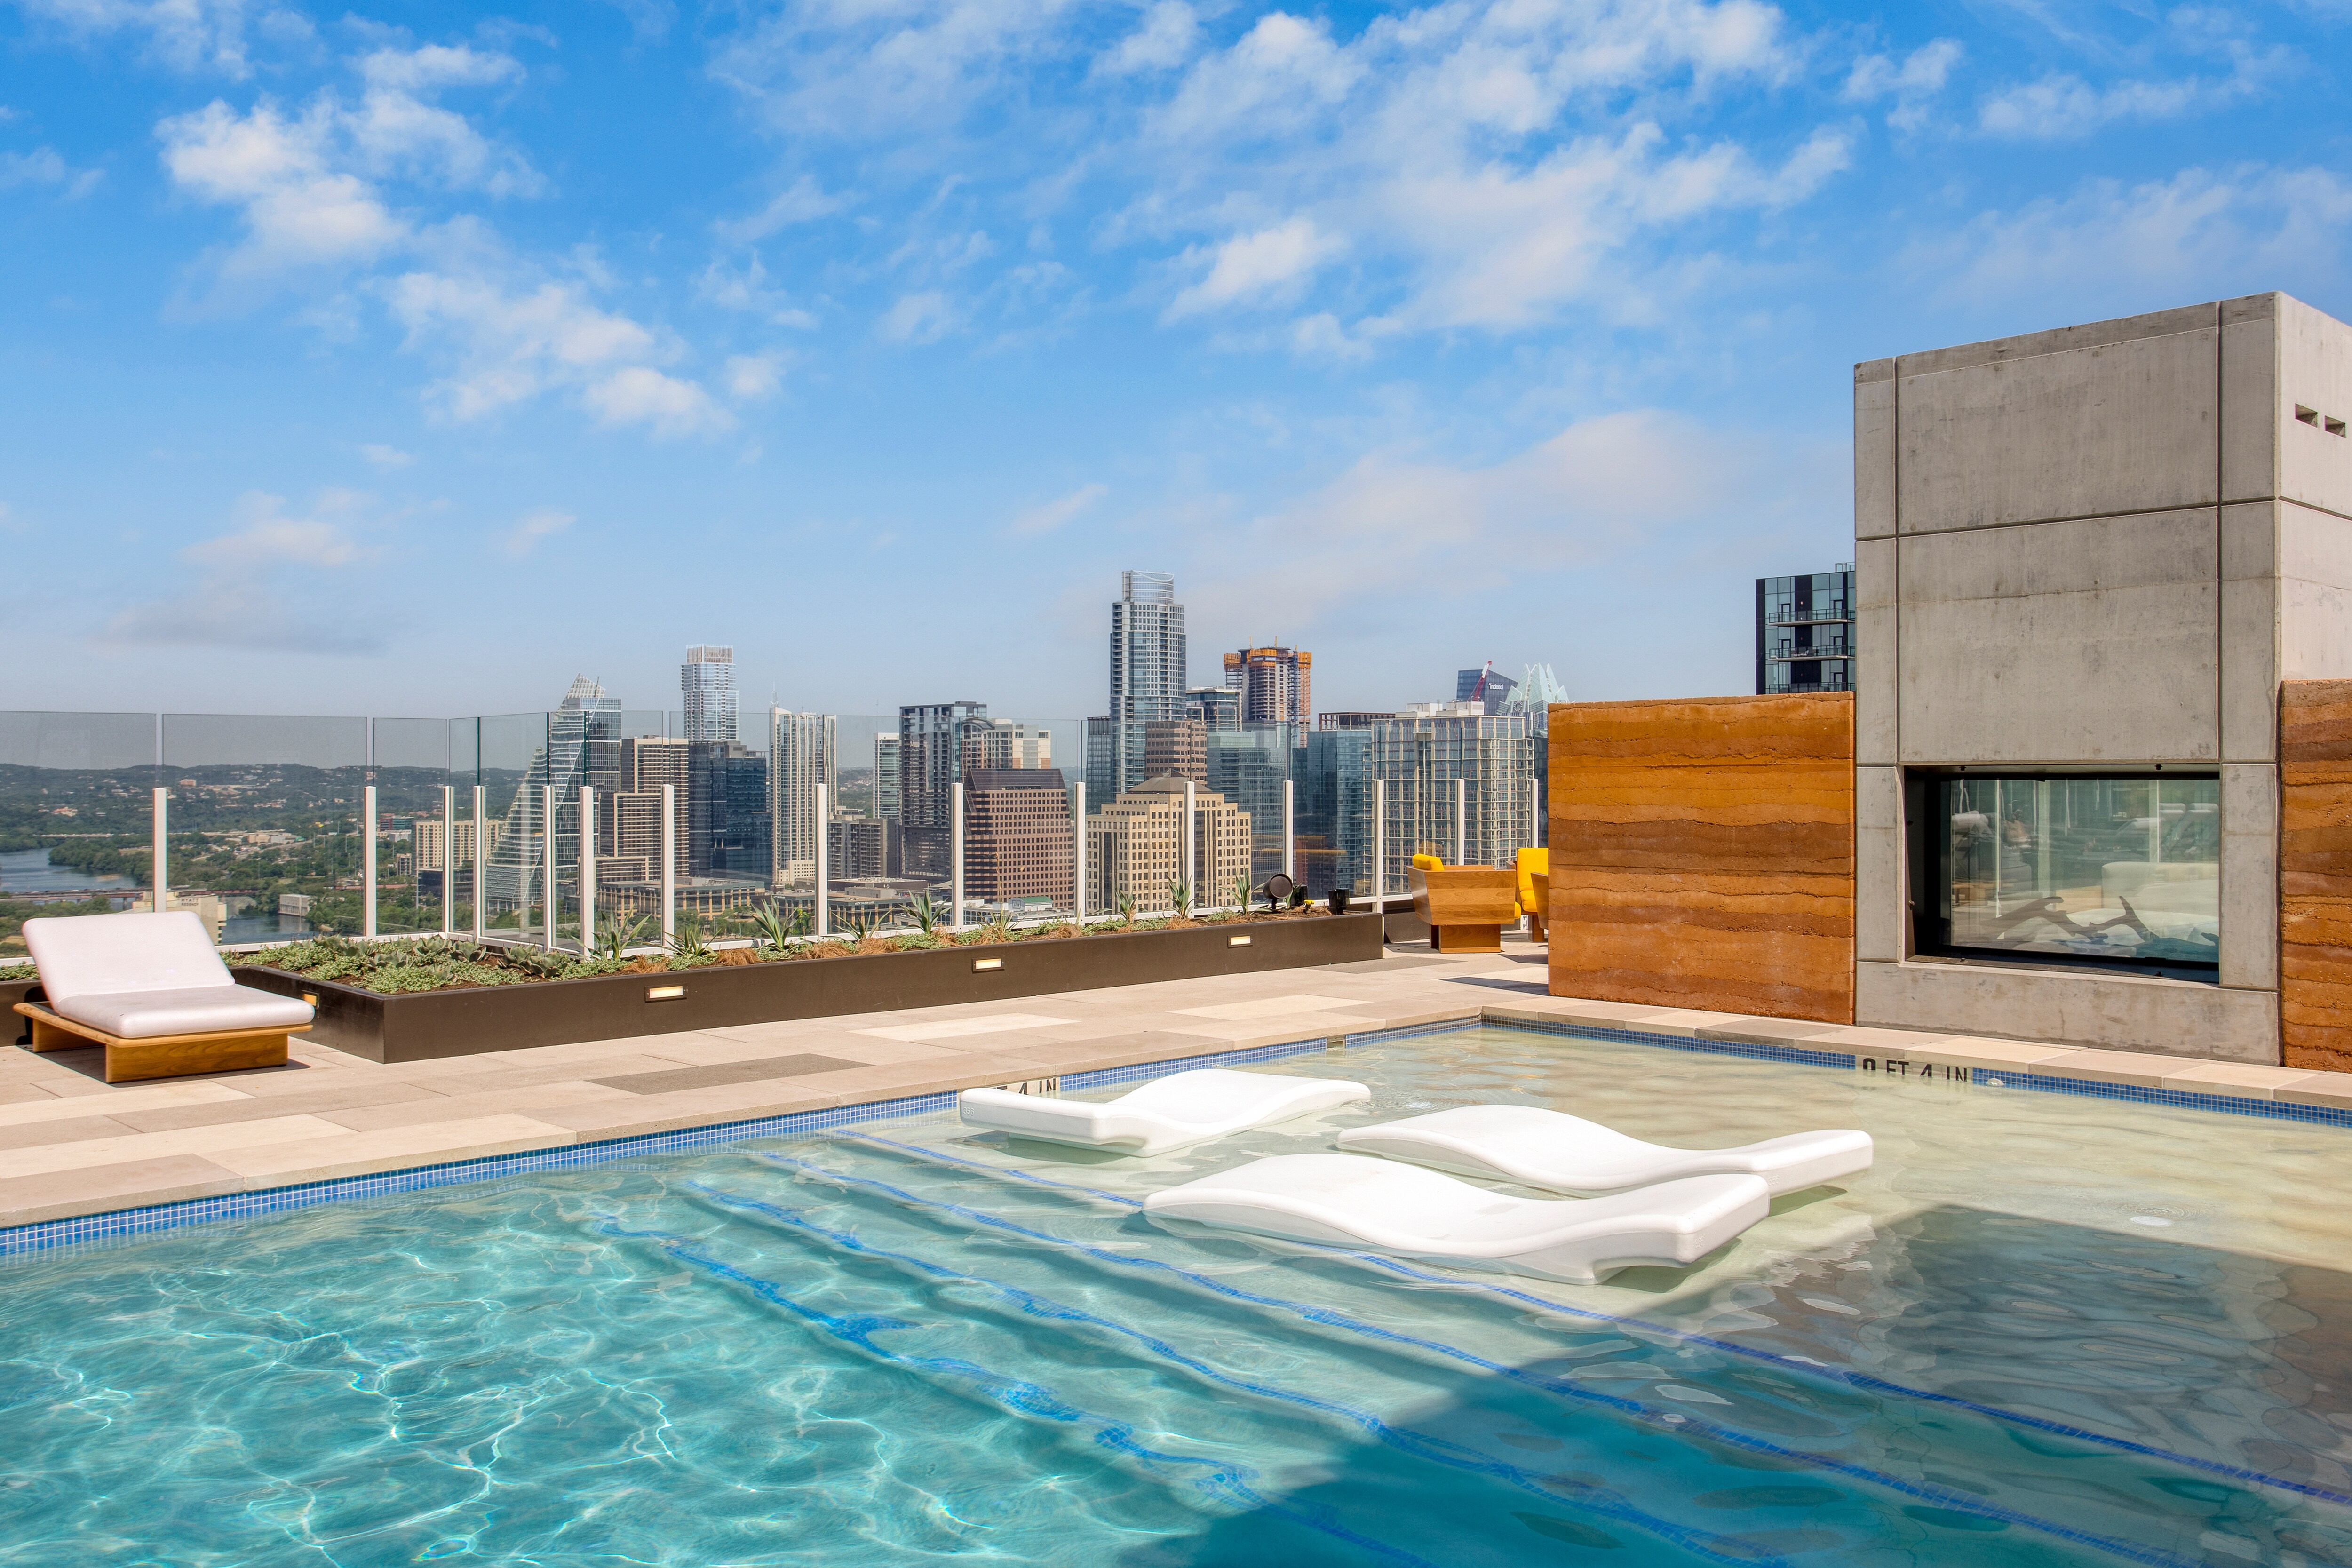 Shared pool on the rooftop is available for guest use.